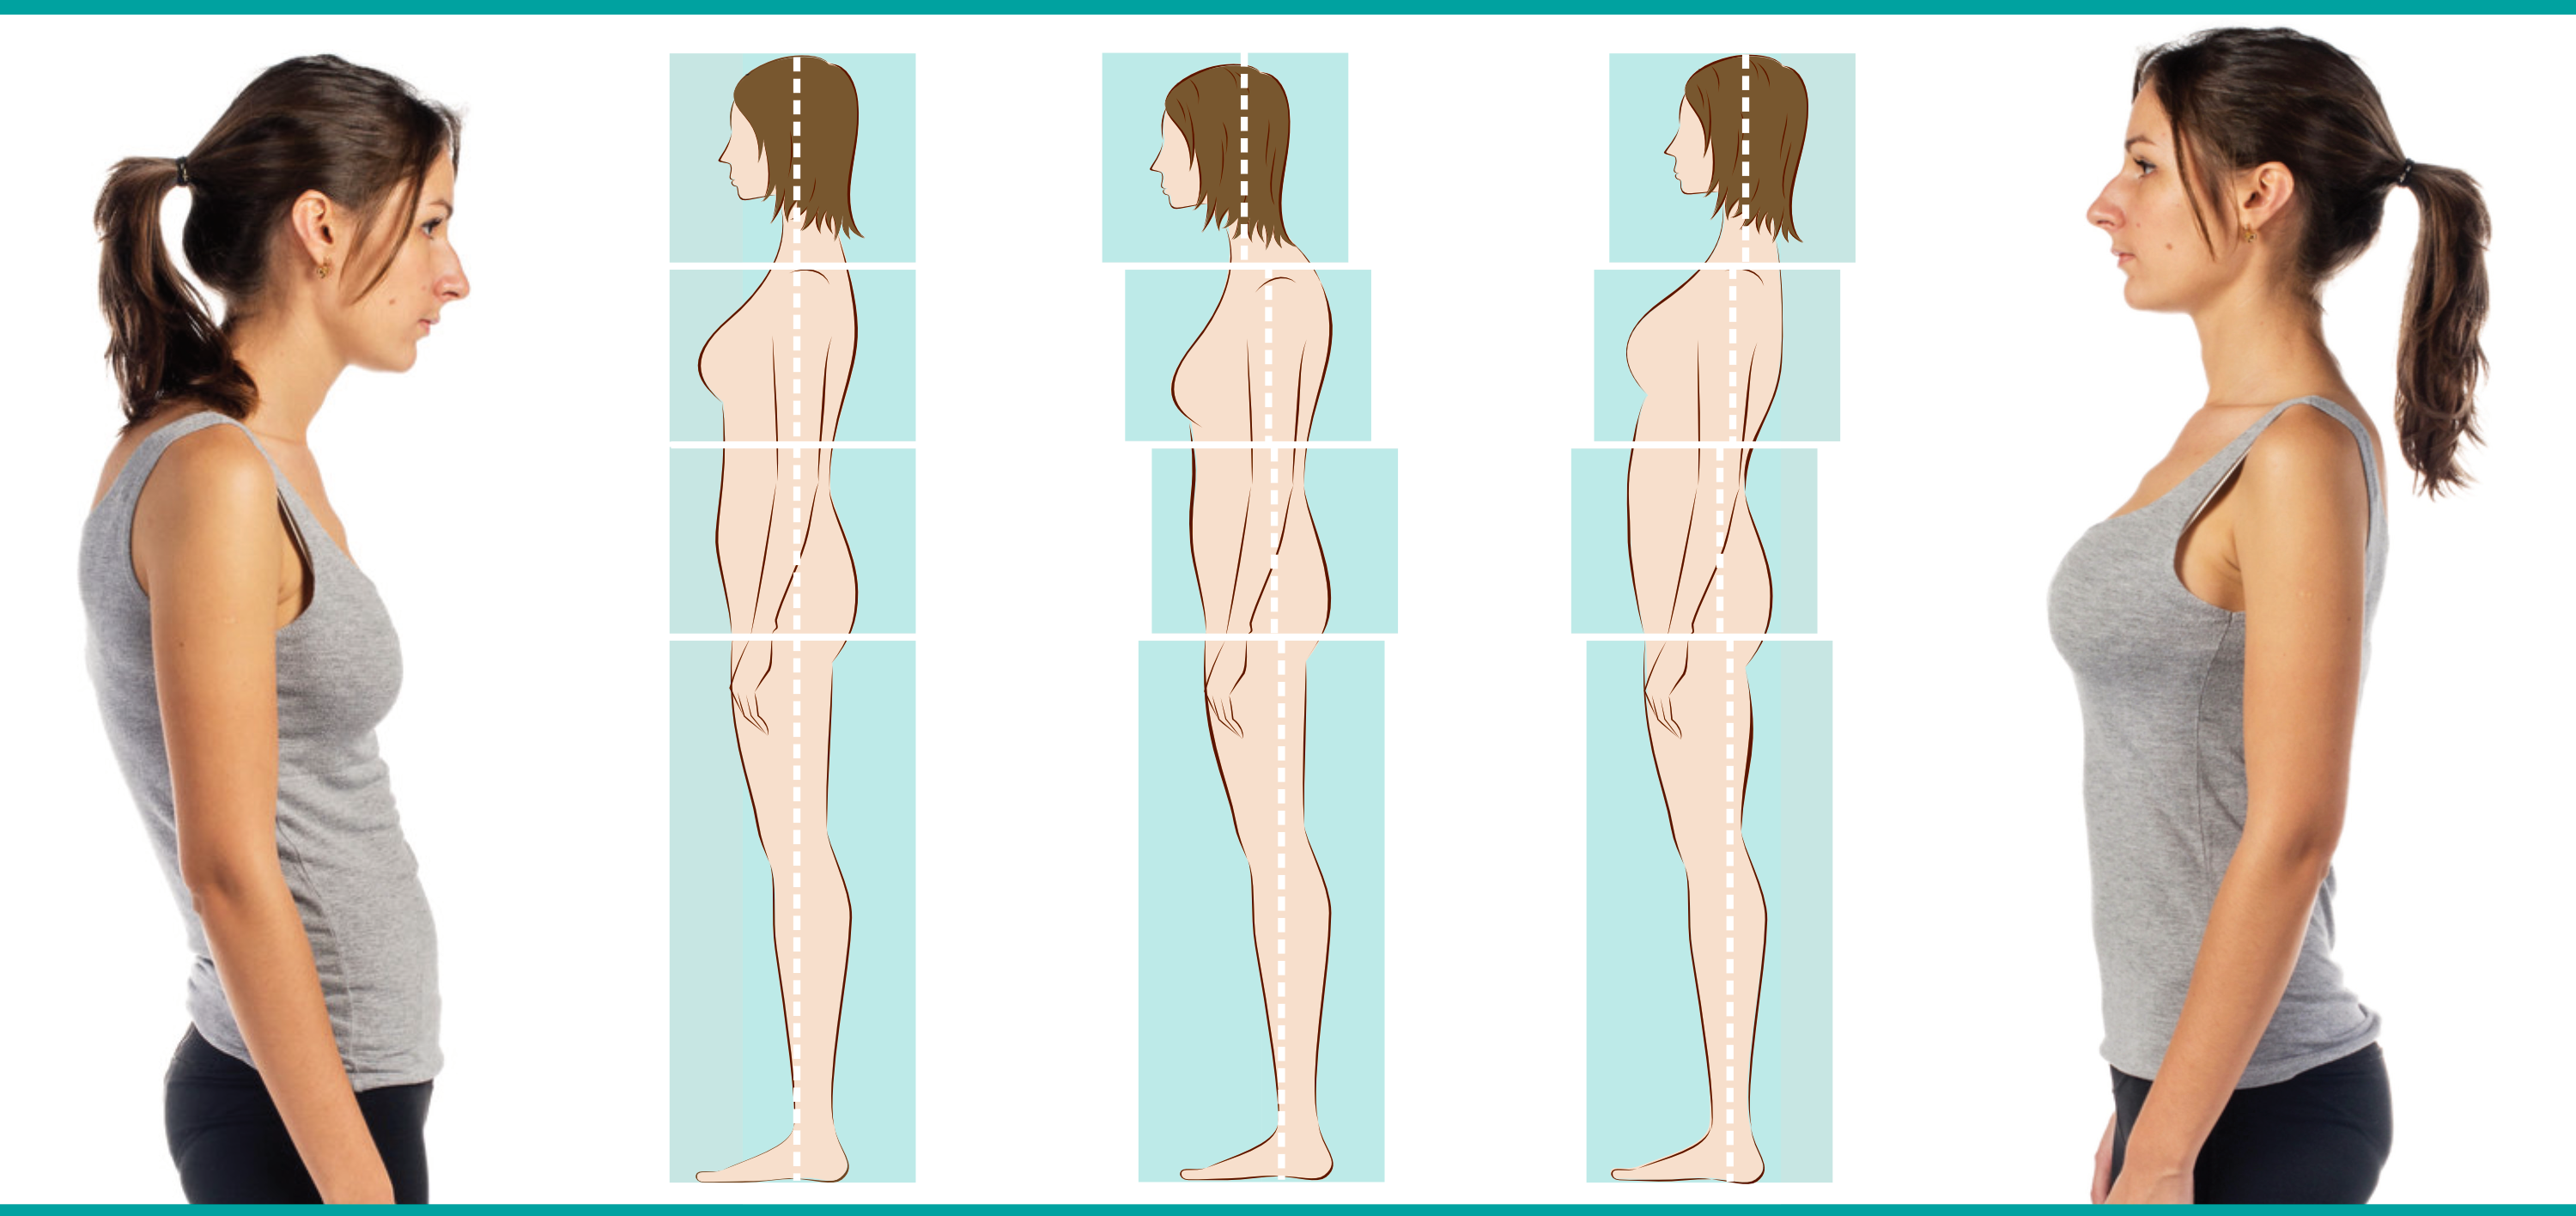 How does your posture impact the way you feel? - Sequence Wiz